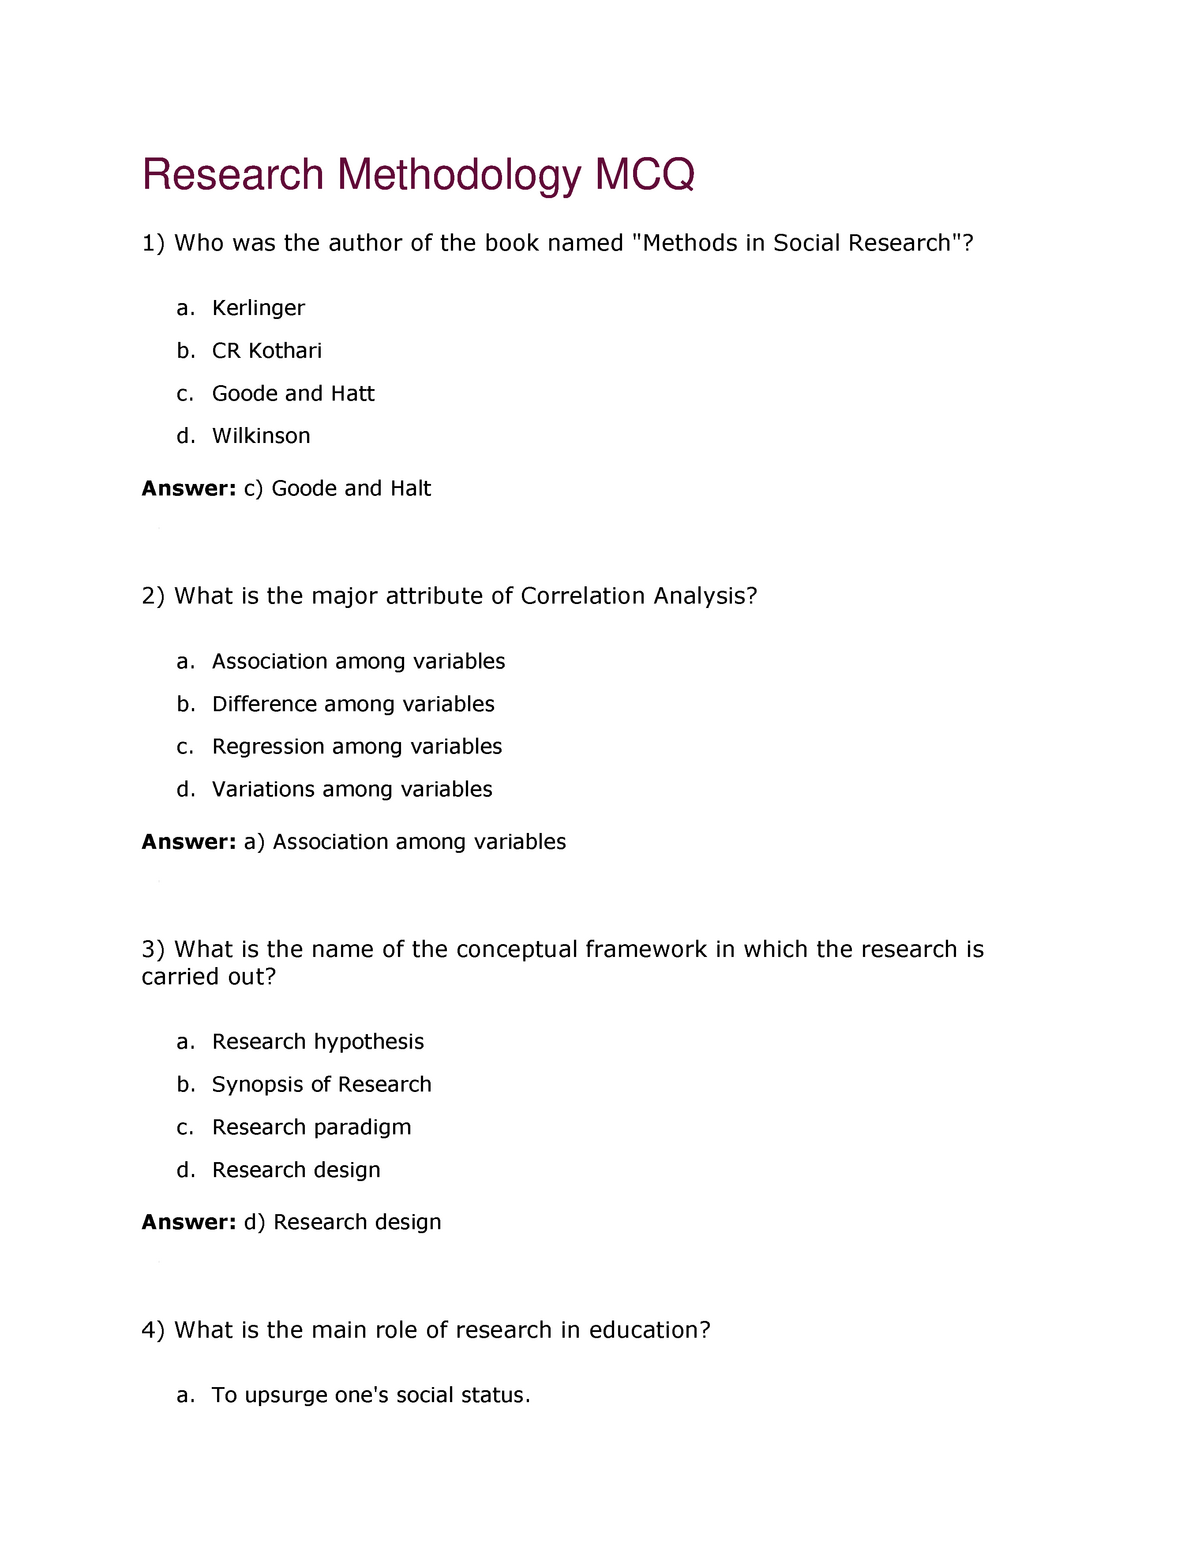 research methodology mcq questions with answers